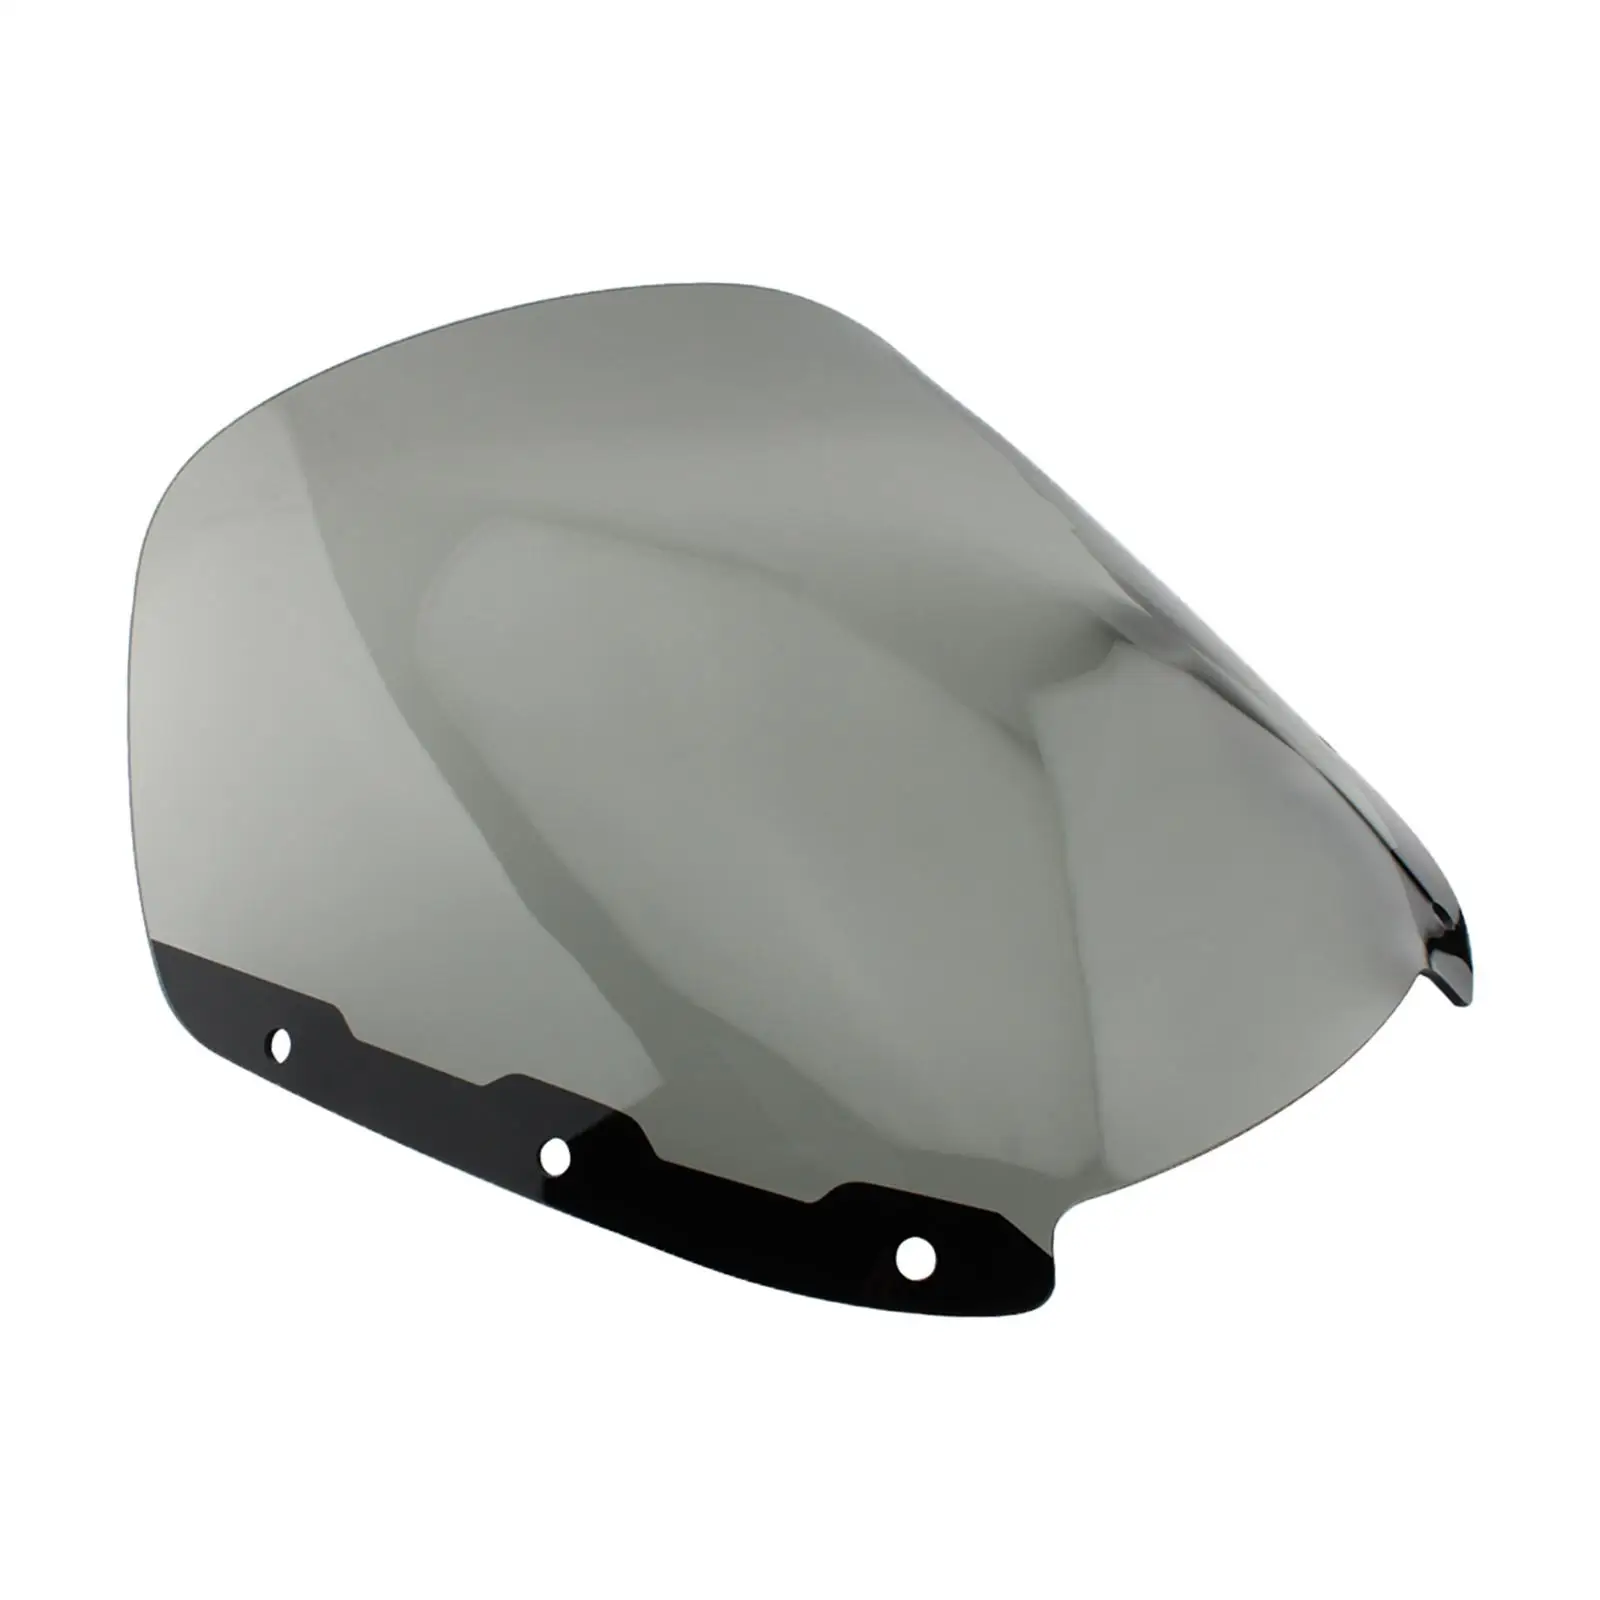 Motorbike Windshield Wind Deflector Protector for BMW R18B Bagger Accessories Replaces Easily Install Durable